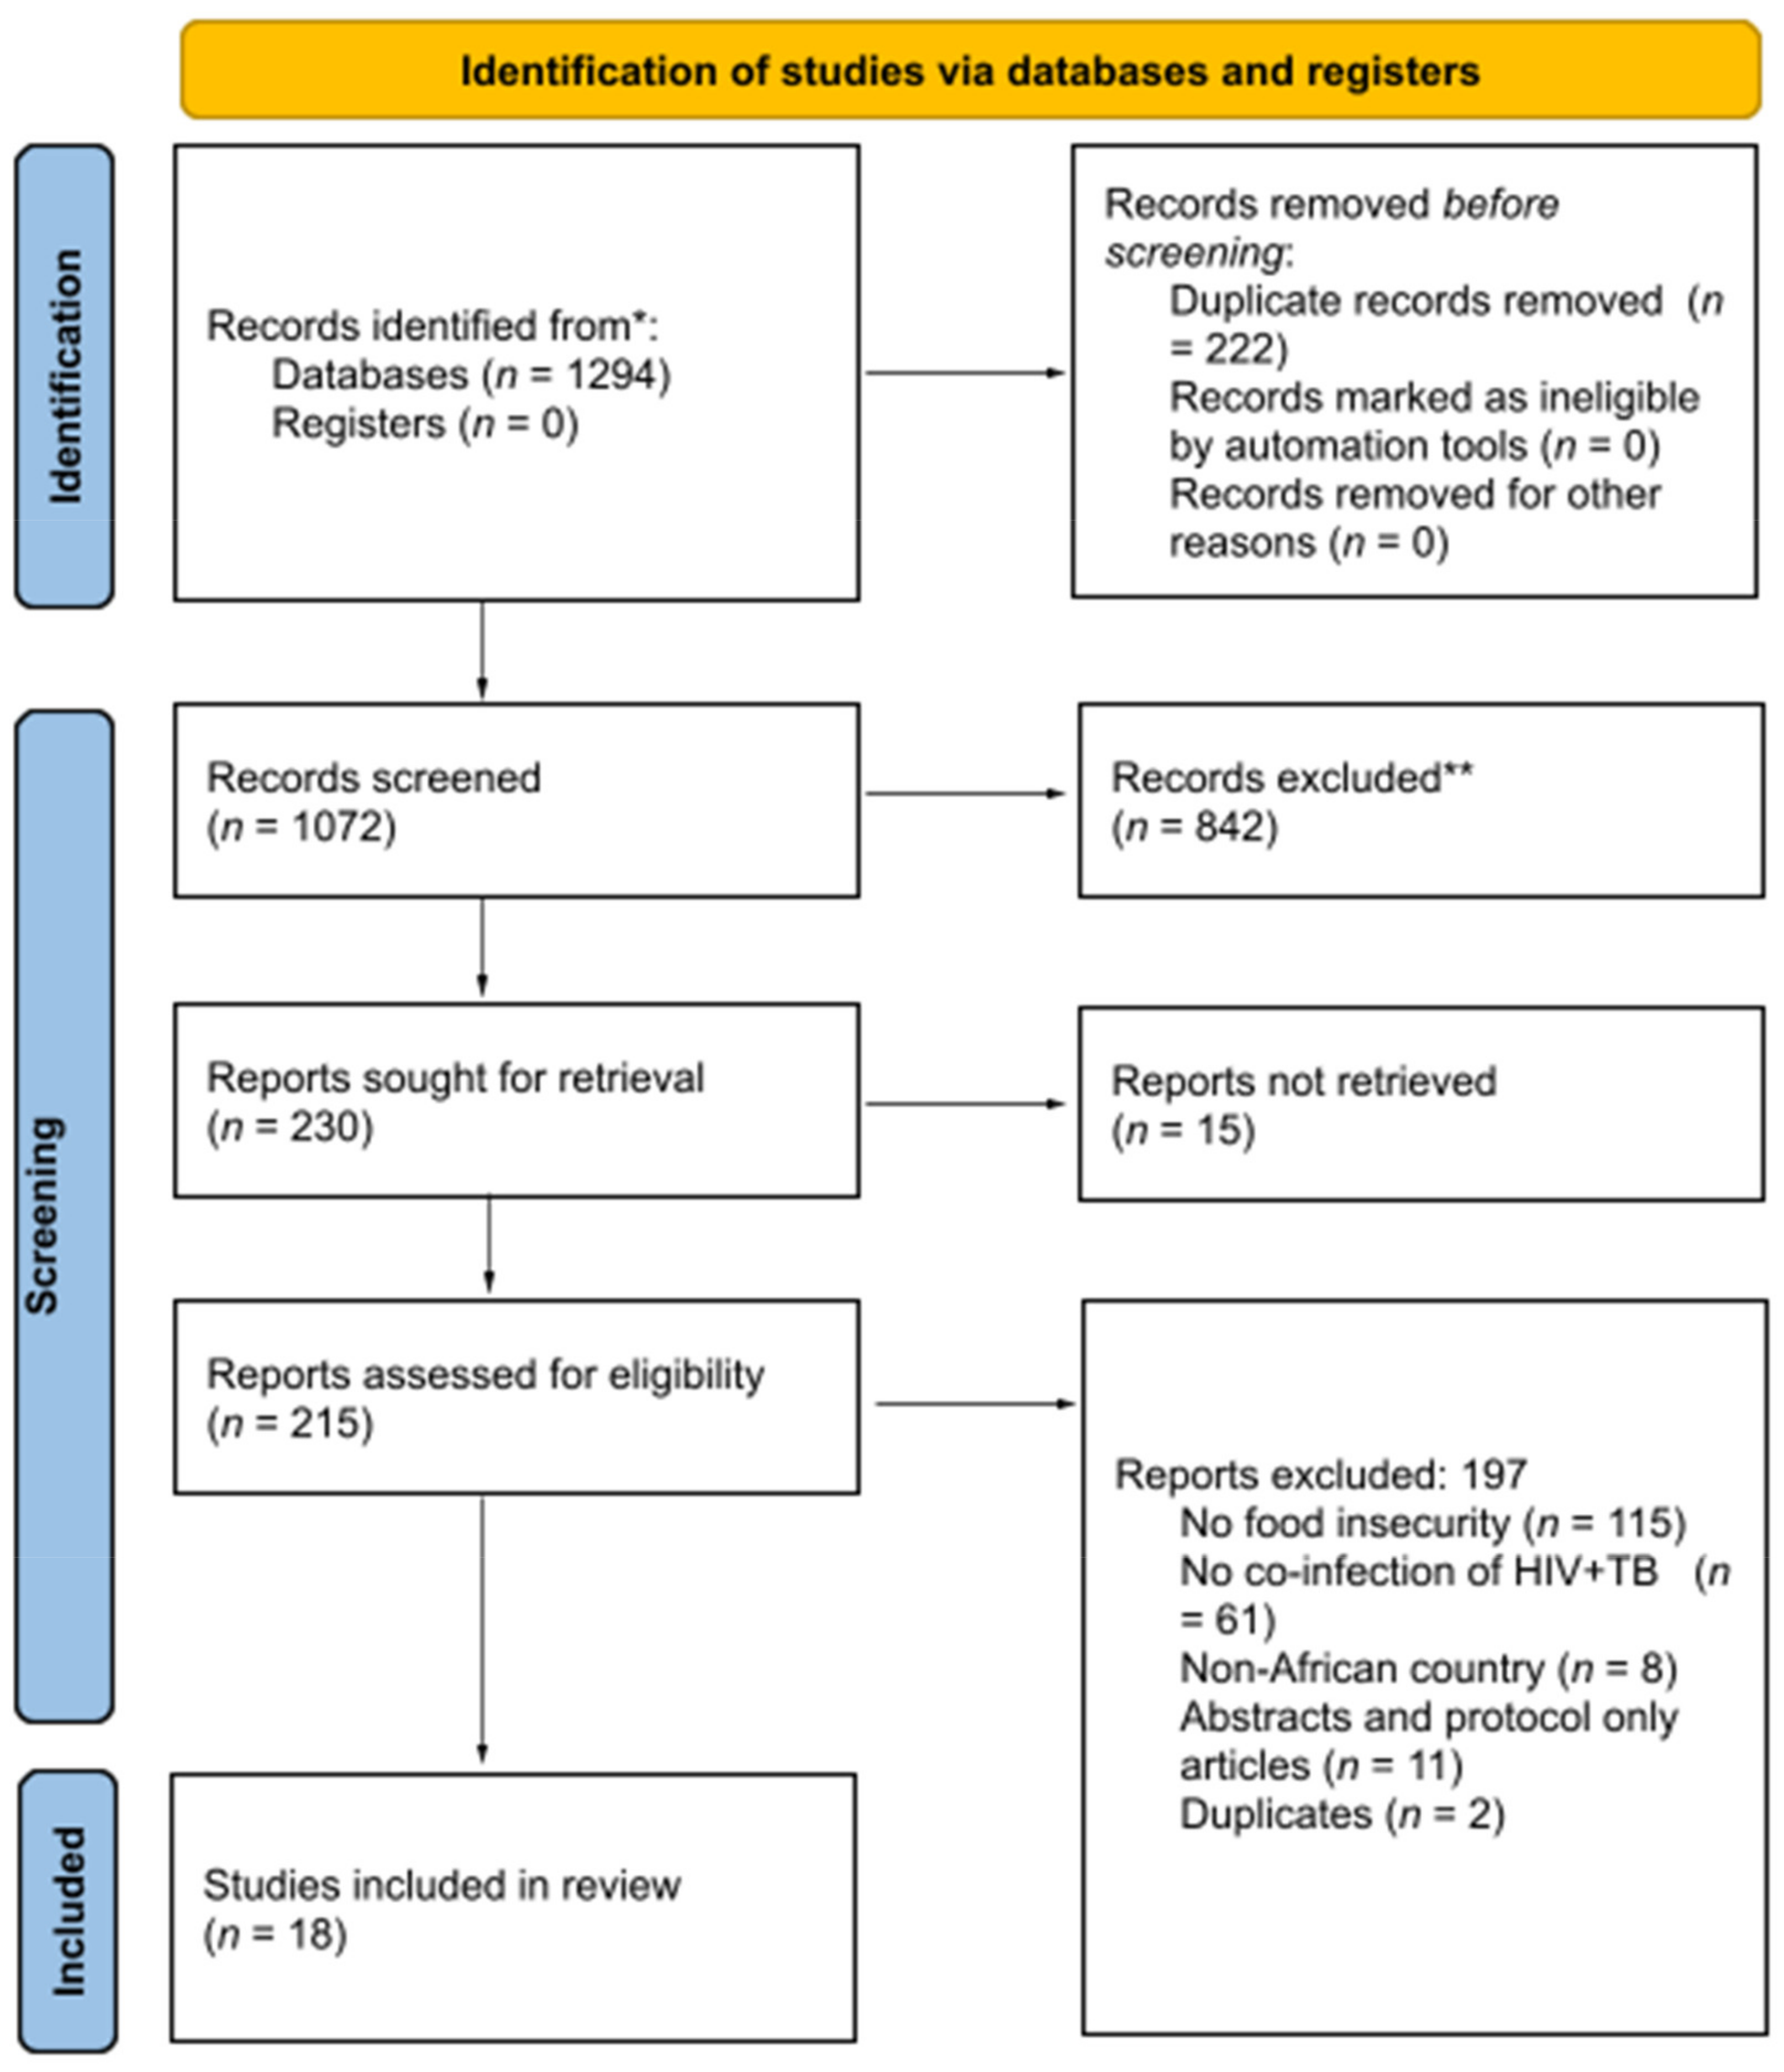 Effectiveness of a community-based approach for the investigation and  management of children with household tuberculosis contact in Cameroon and  Uganda: a cluster-randomised trial - The Lancet Global Health